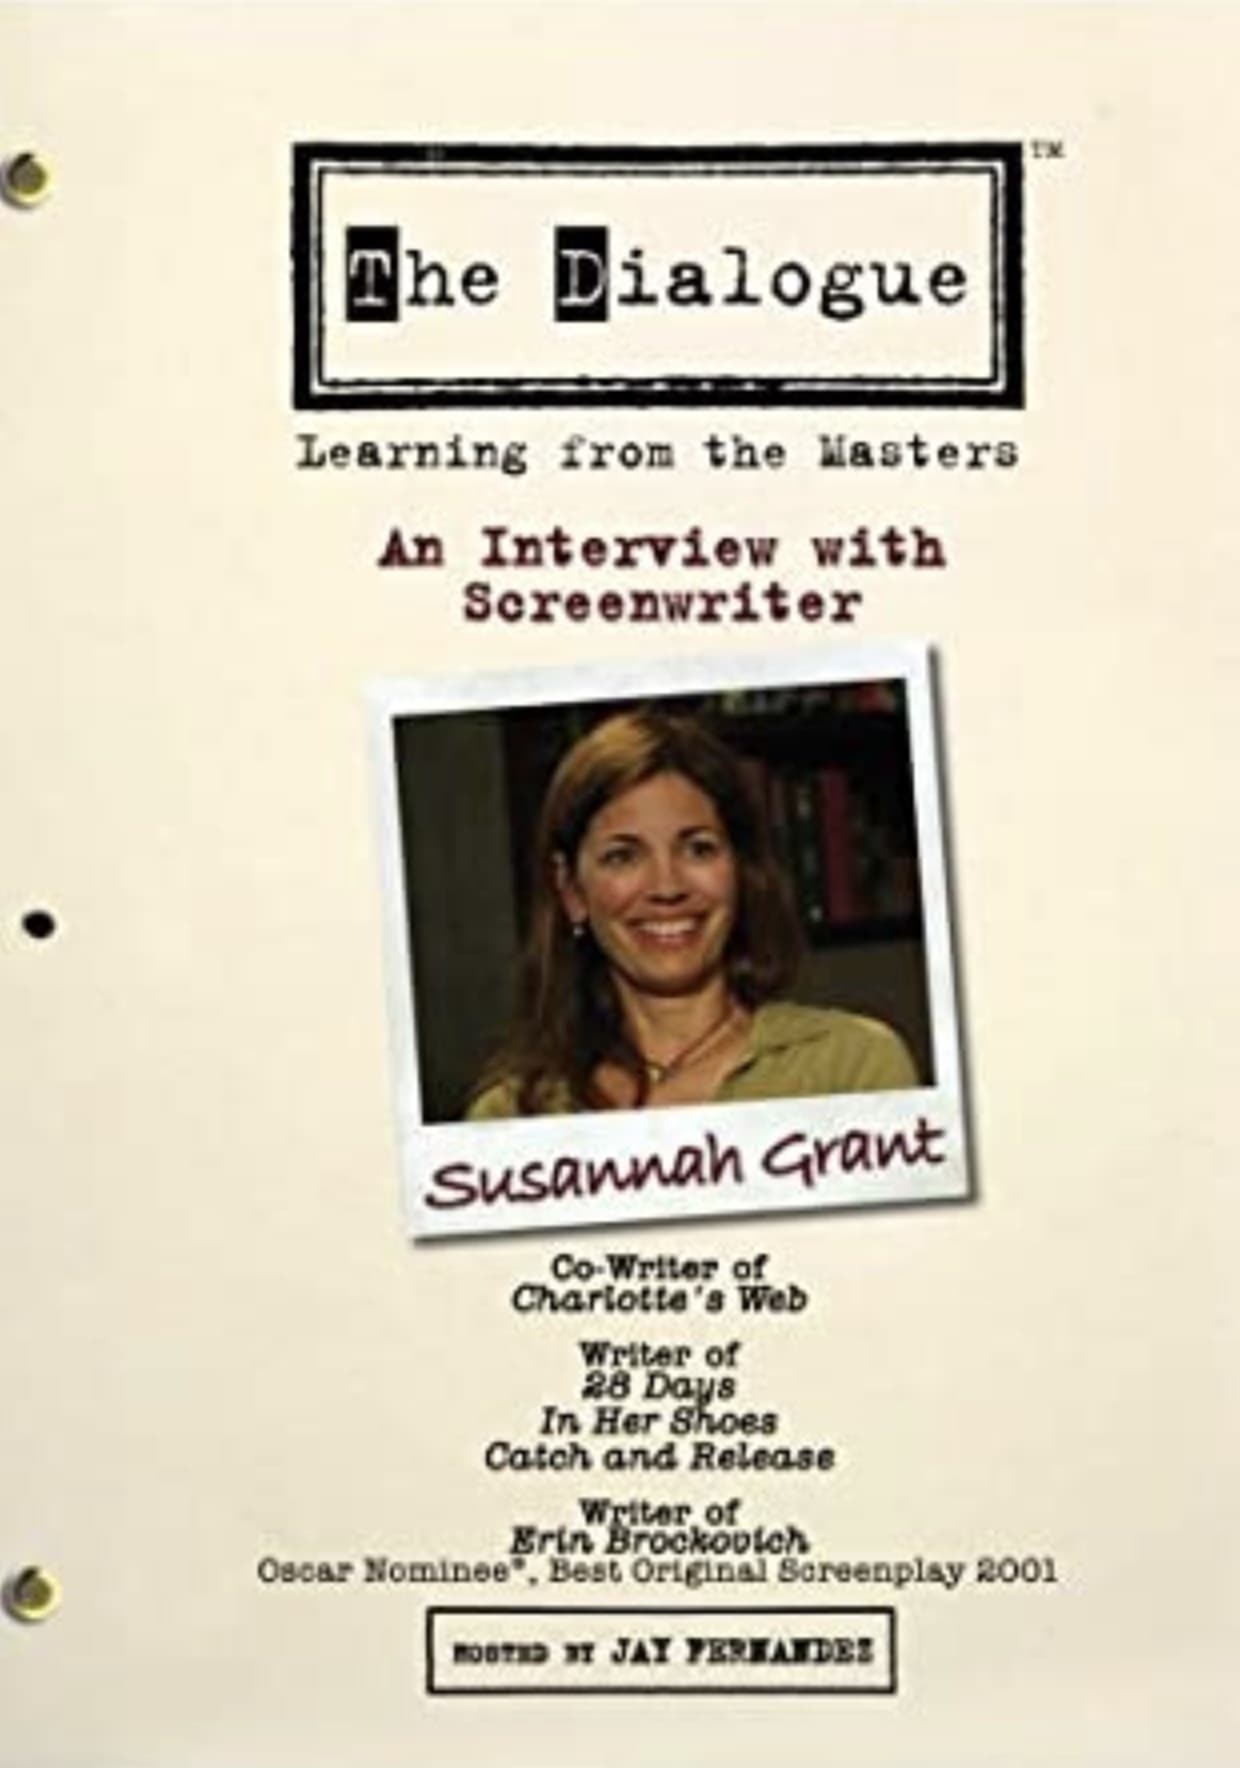 The Dialogue: An Interview with Screenwriter Susannah Grant